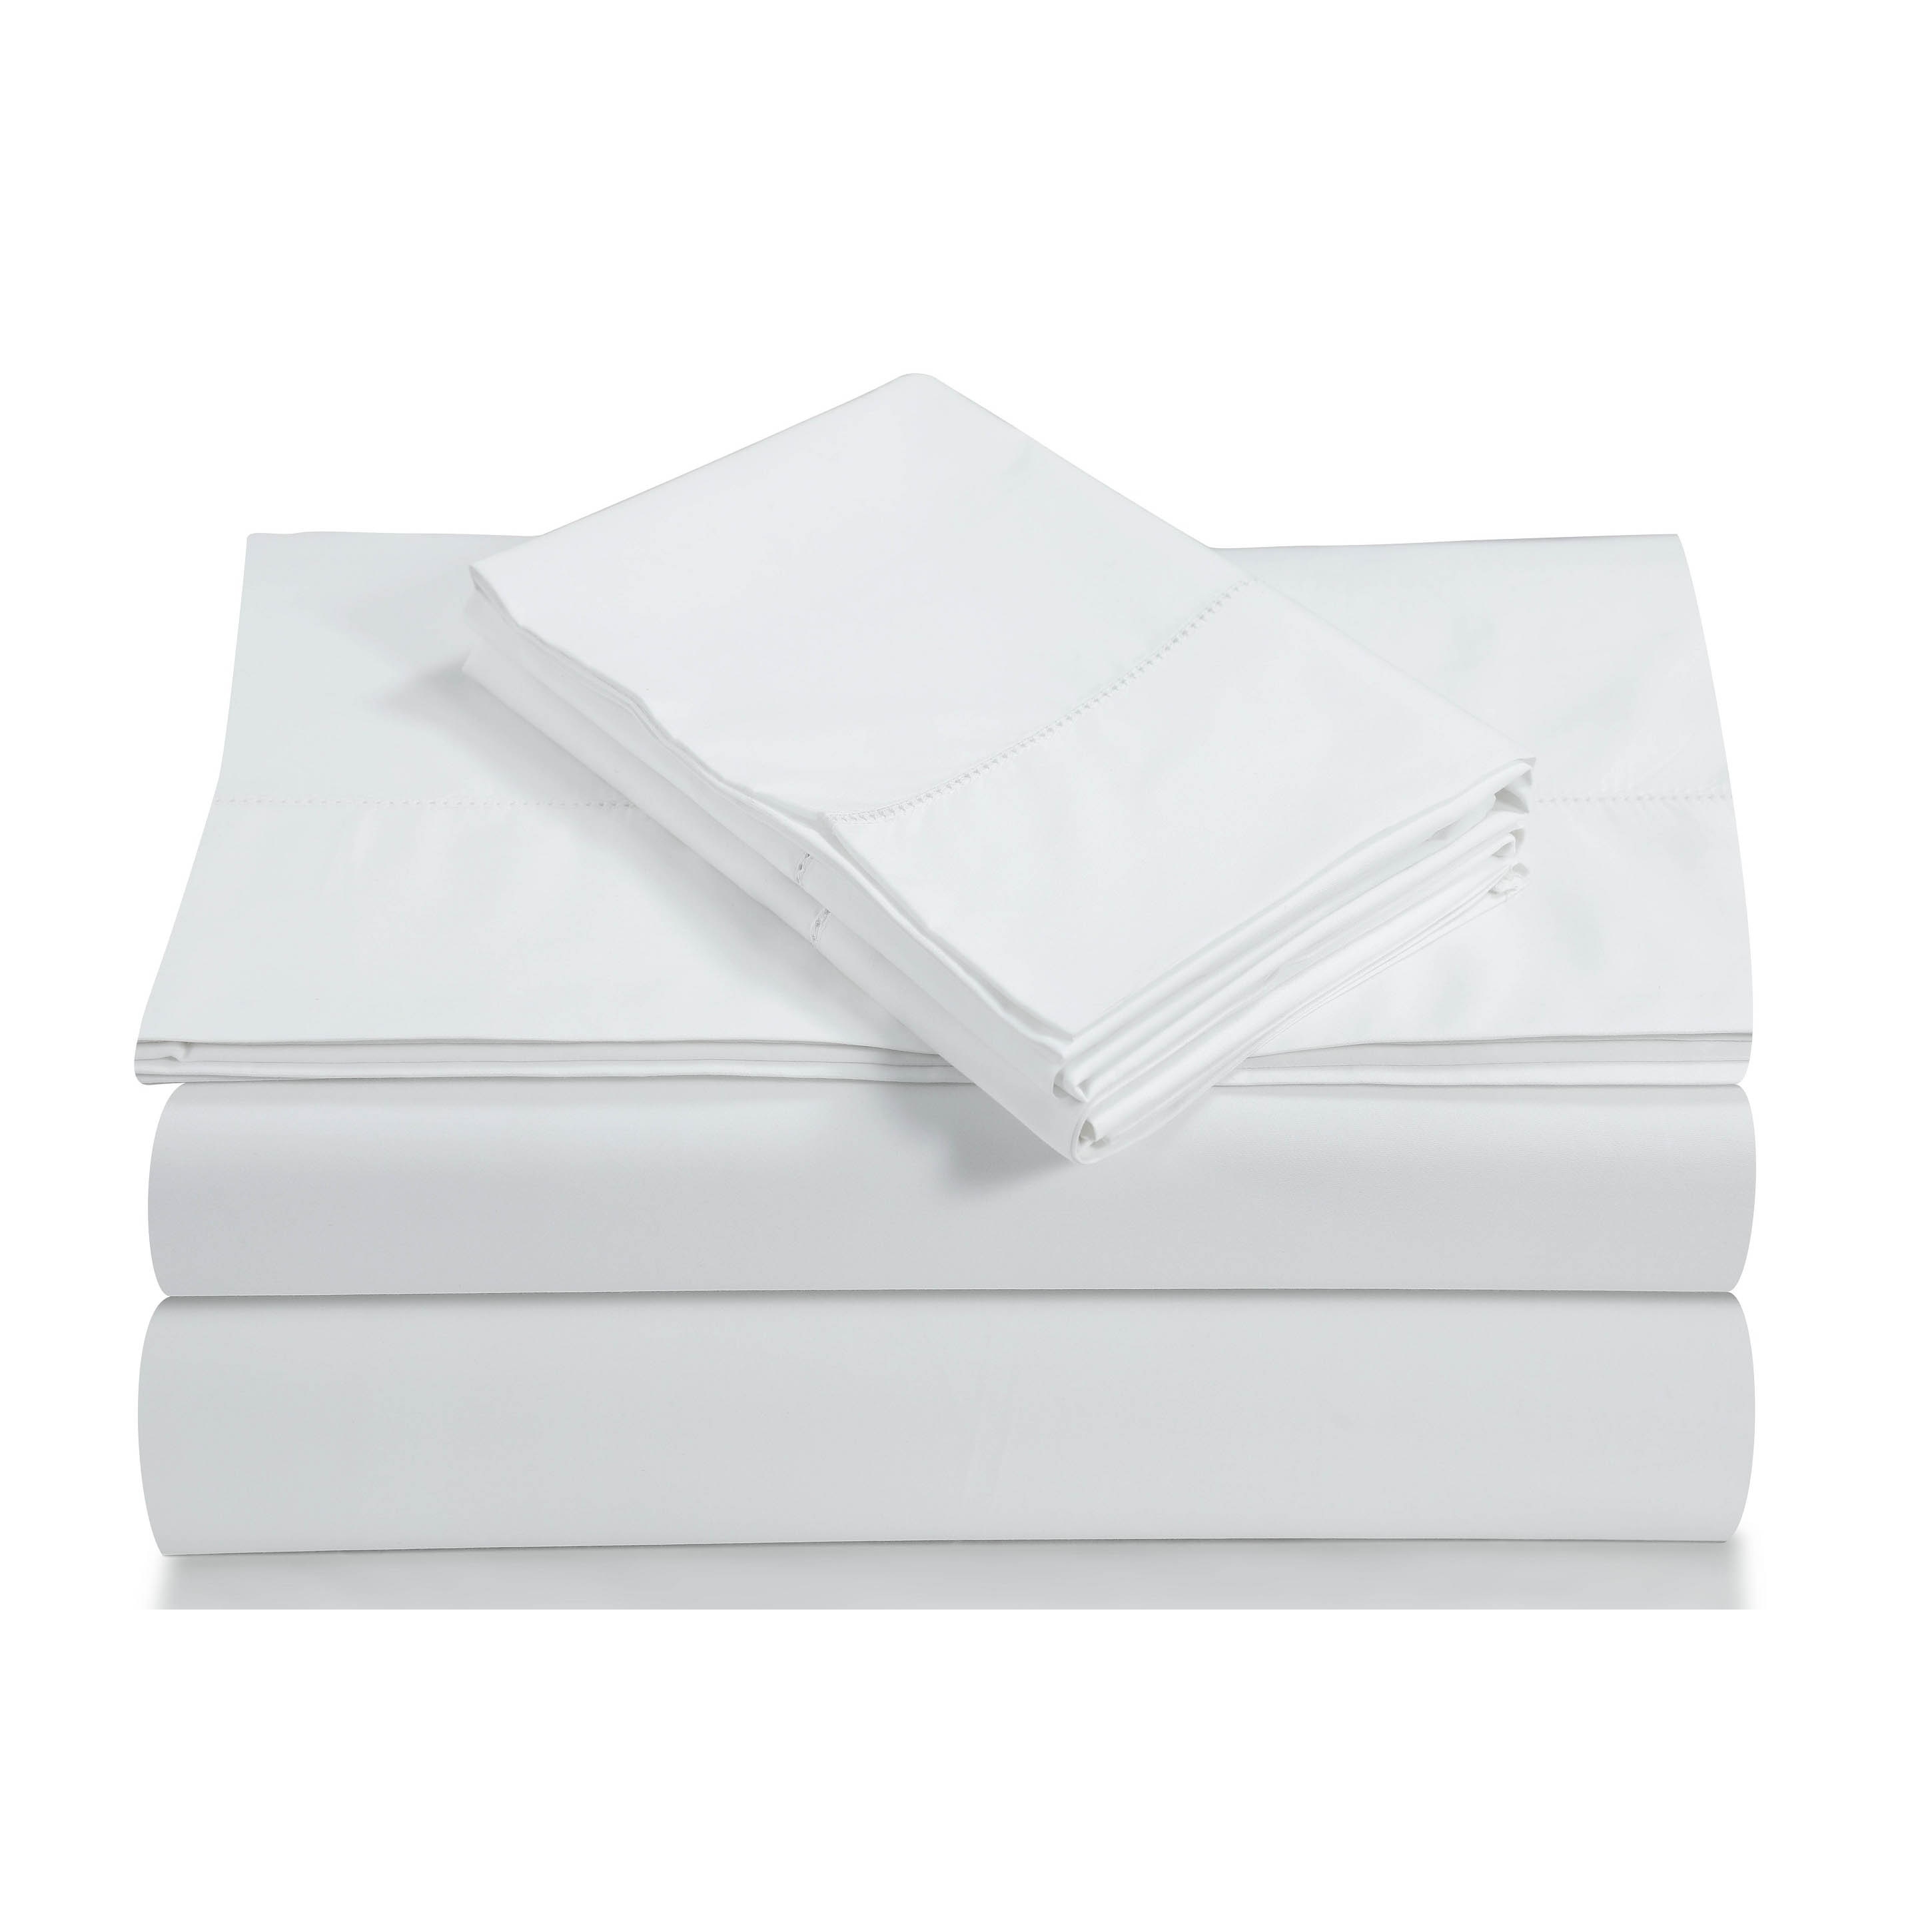 https://ak1.ostkcdn.com/images/products/is/images/direct/755f178c004621538ef411fa4884f4d08cd33af9/Egyptian-Cotton-800-TC-Deep-Pocket-Bed-Sheet-Set-with-Luxury-size-Flat.jpg